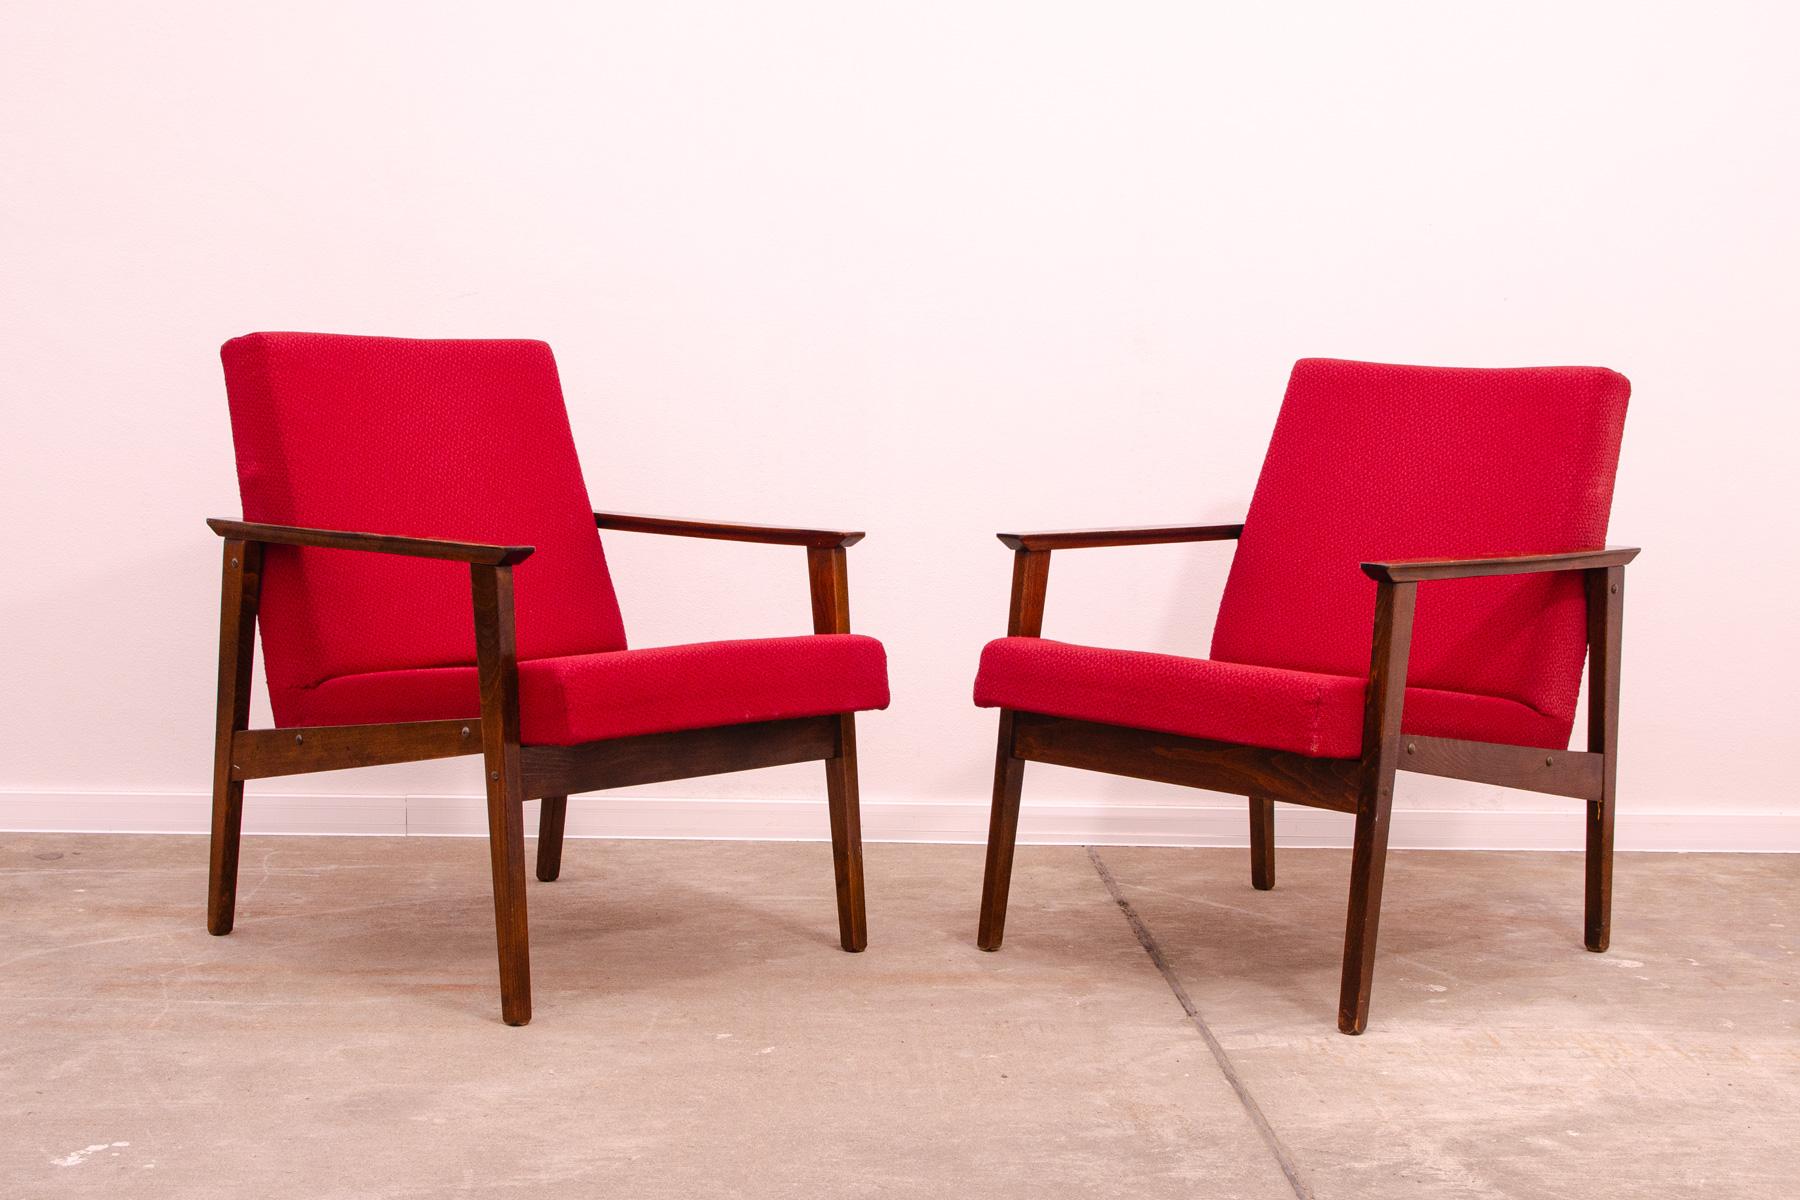 These midcentury armchairs were designed by Jaroslav Šmídek for TON company and made in the former Czechoslovakia in the 1970´s. They are made of beechwood.

The chairs are stable and comfortable, the springs under the seat are firm and stable.

The